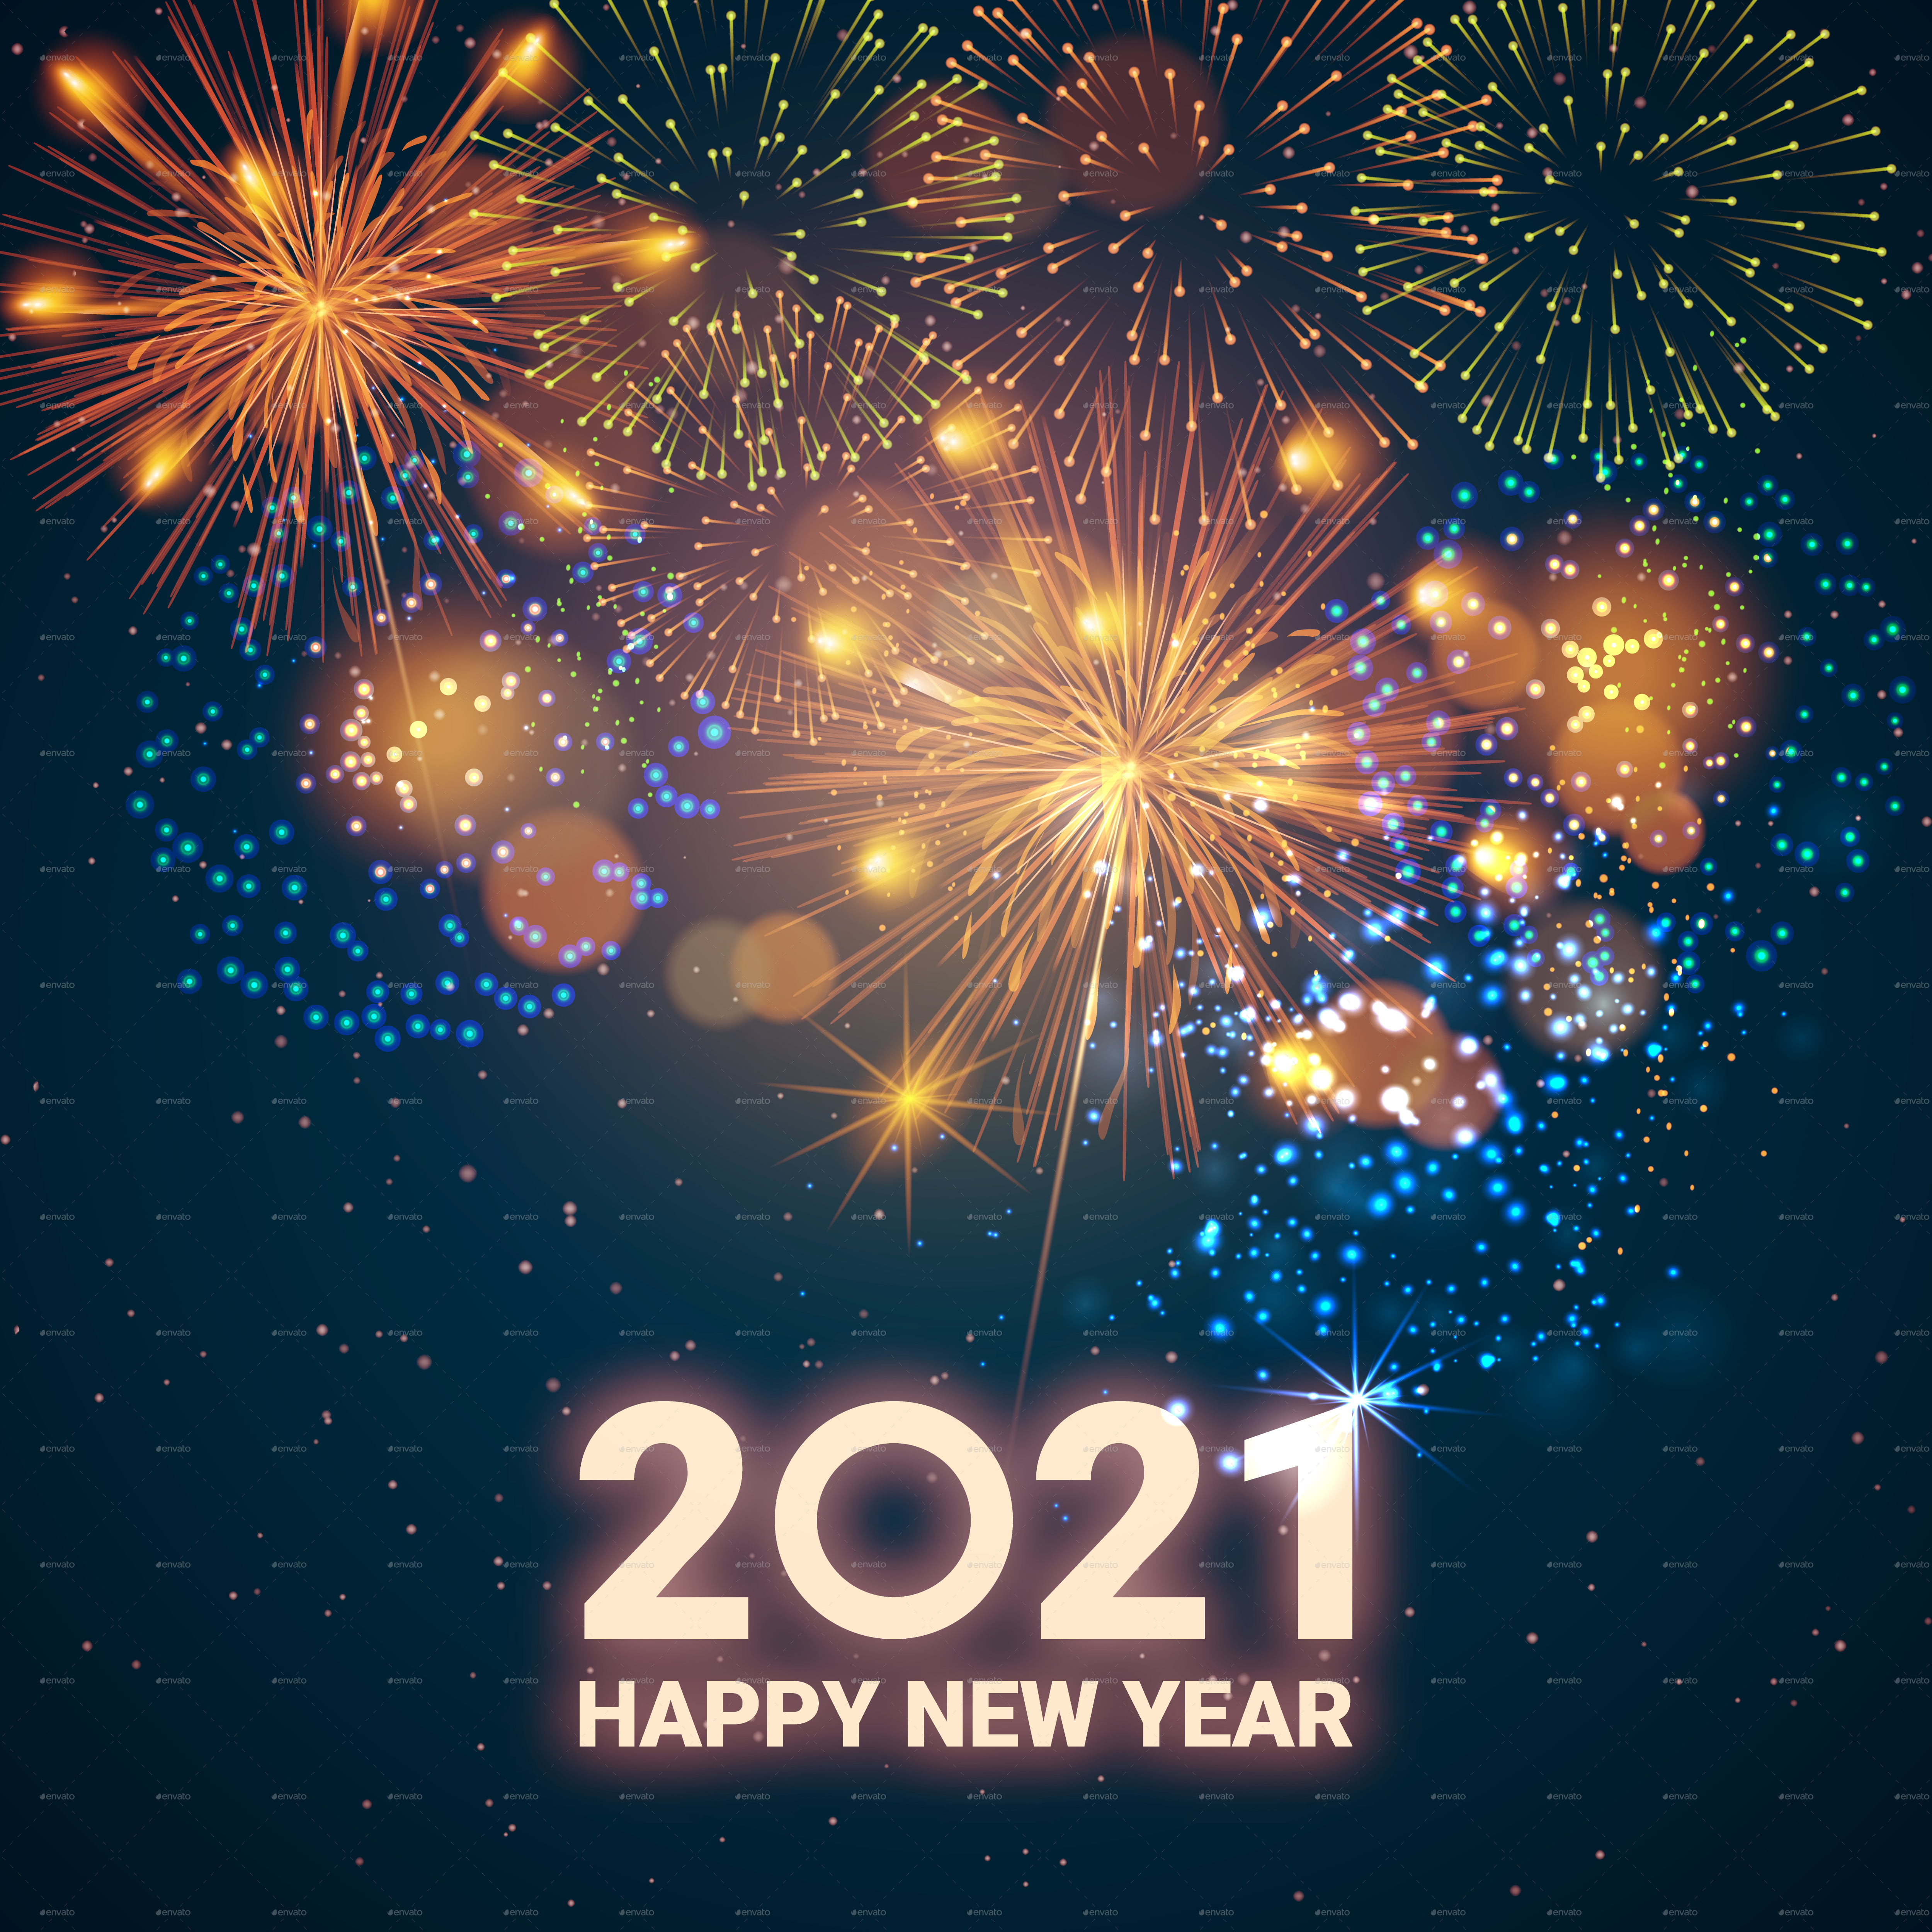 Greeting Card Happy New Year 2021 by java86 | GraphicRiver